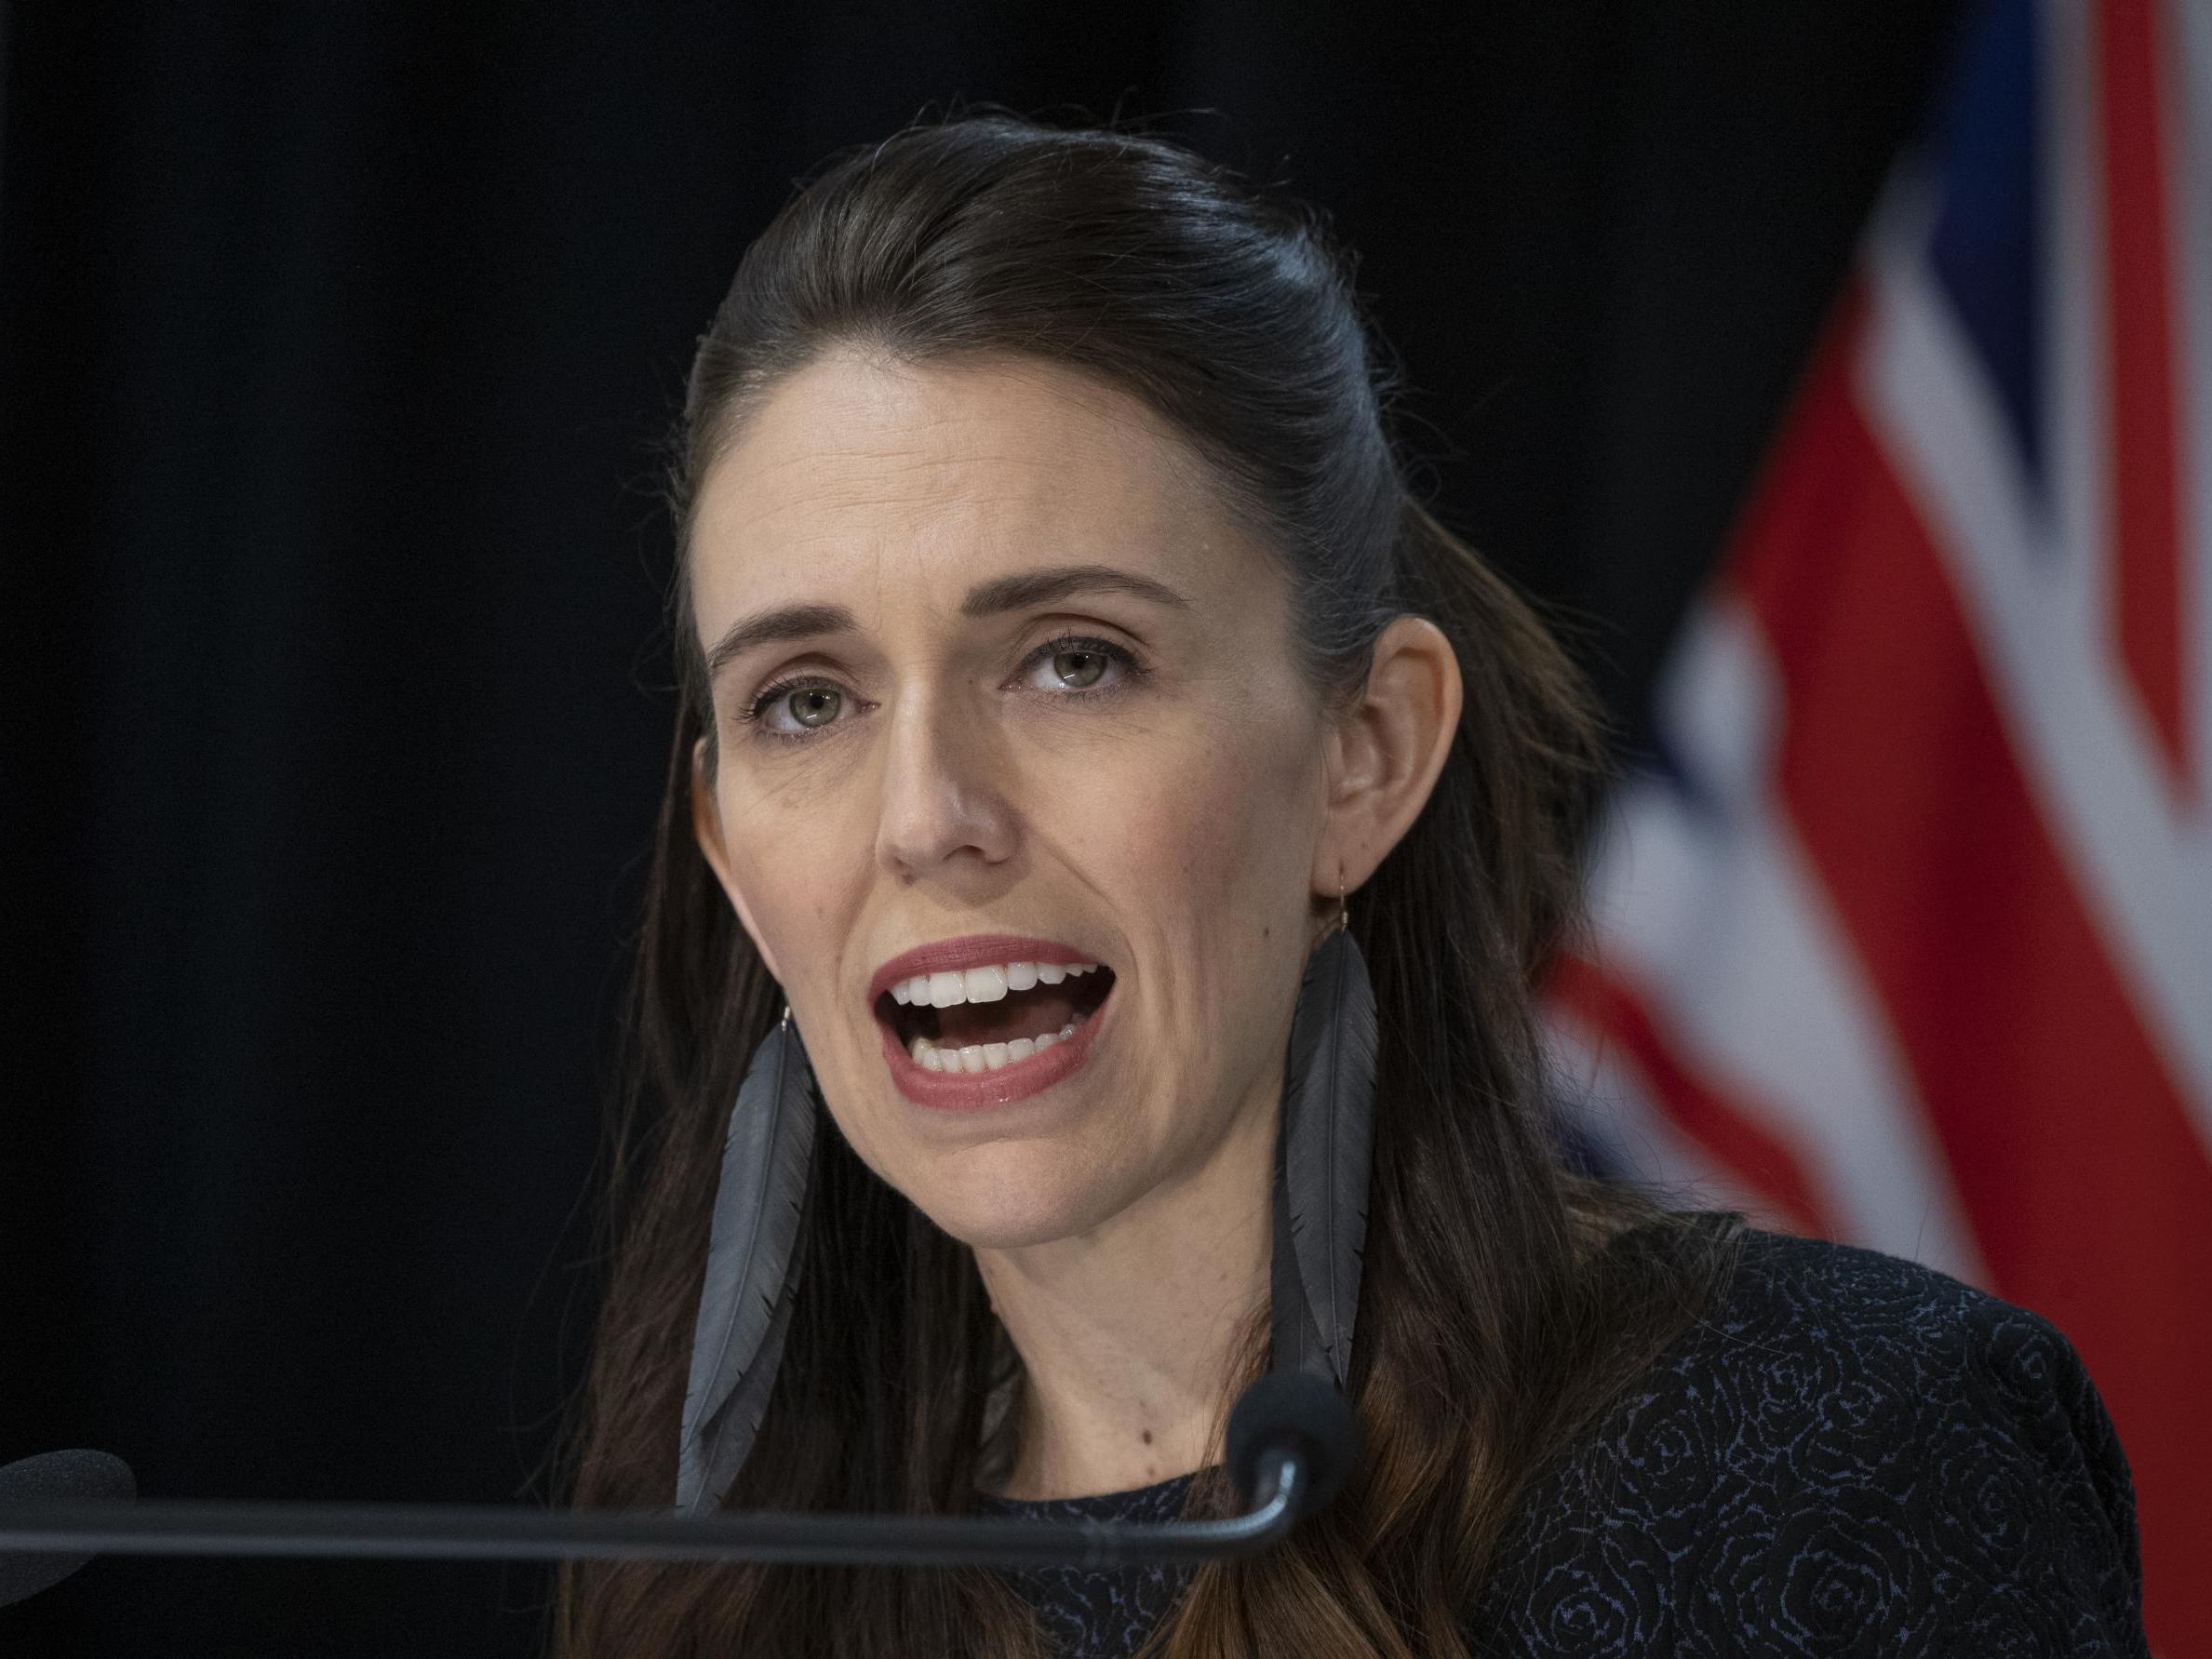 Jacinda Ardern's popularity reached 59.5 per cent, up 20.8 from the previous poll